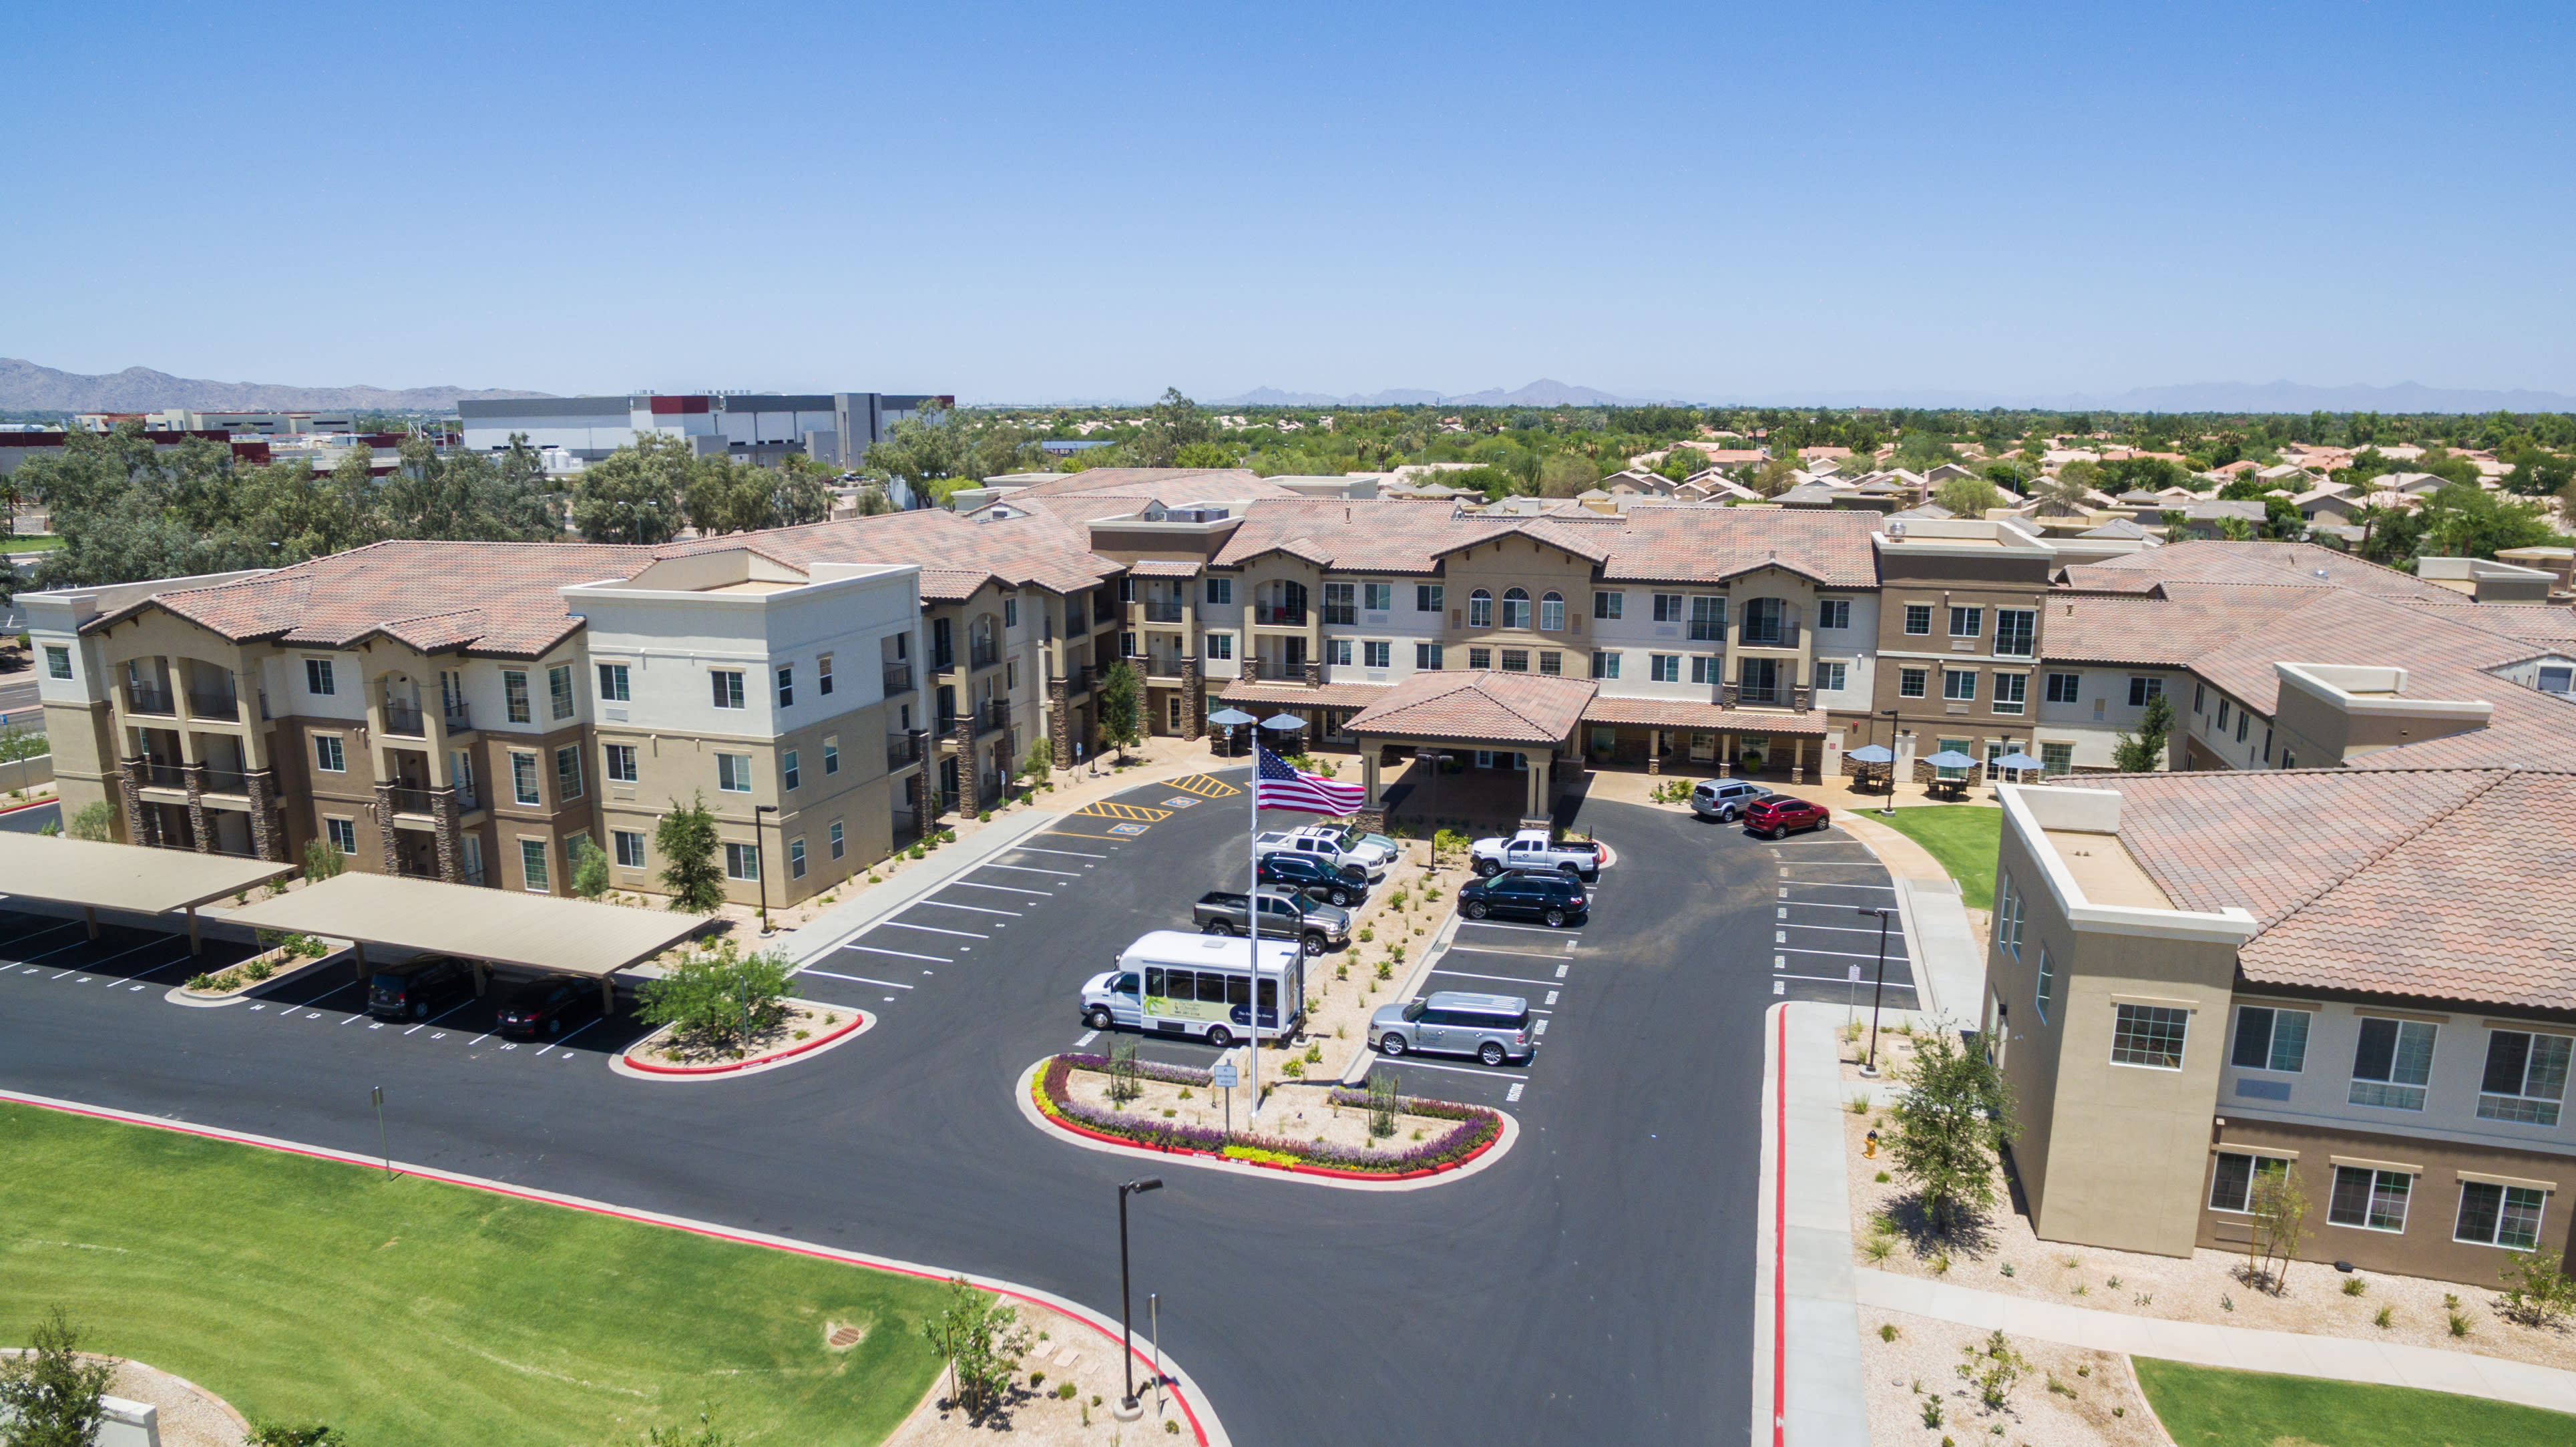 The Enclave at Chandler Senior Living aerial view of community